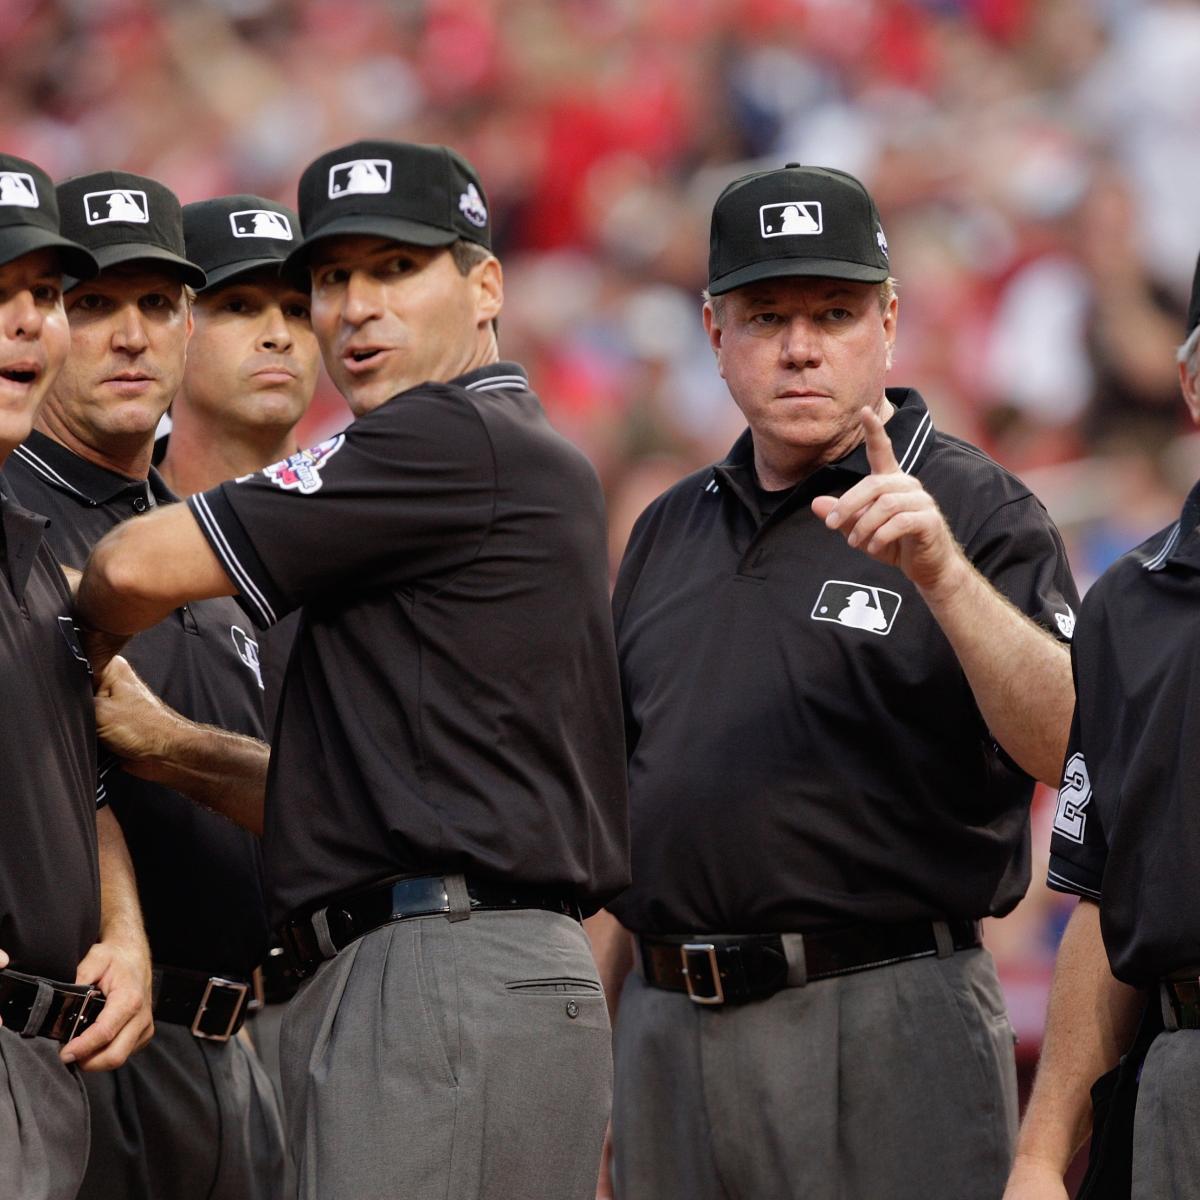 MLB Communications on X: Five umpires have been promoted to the